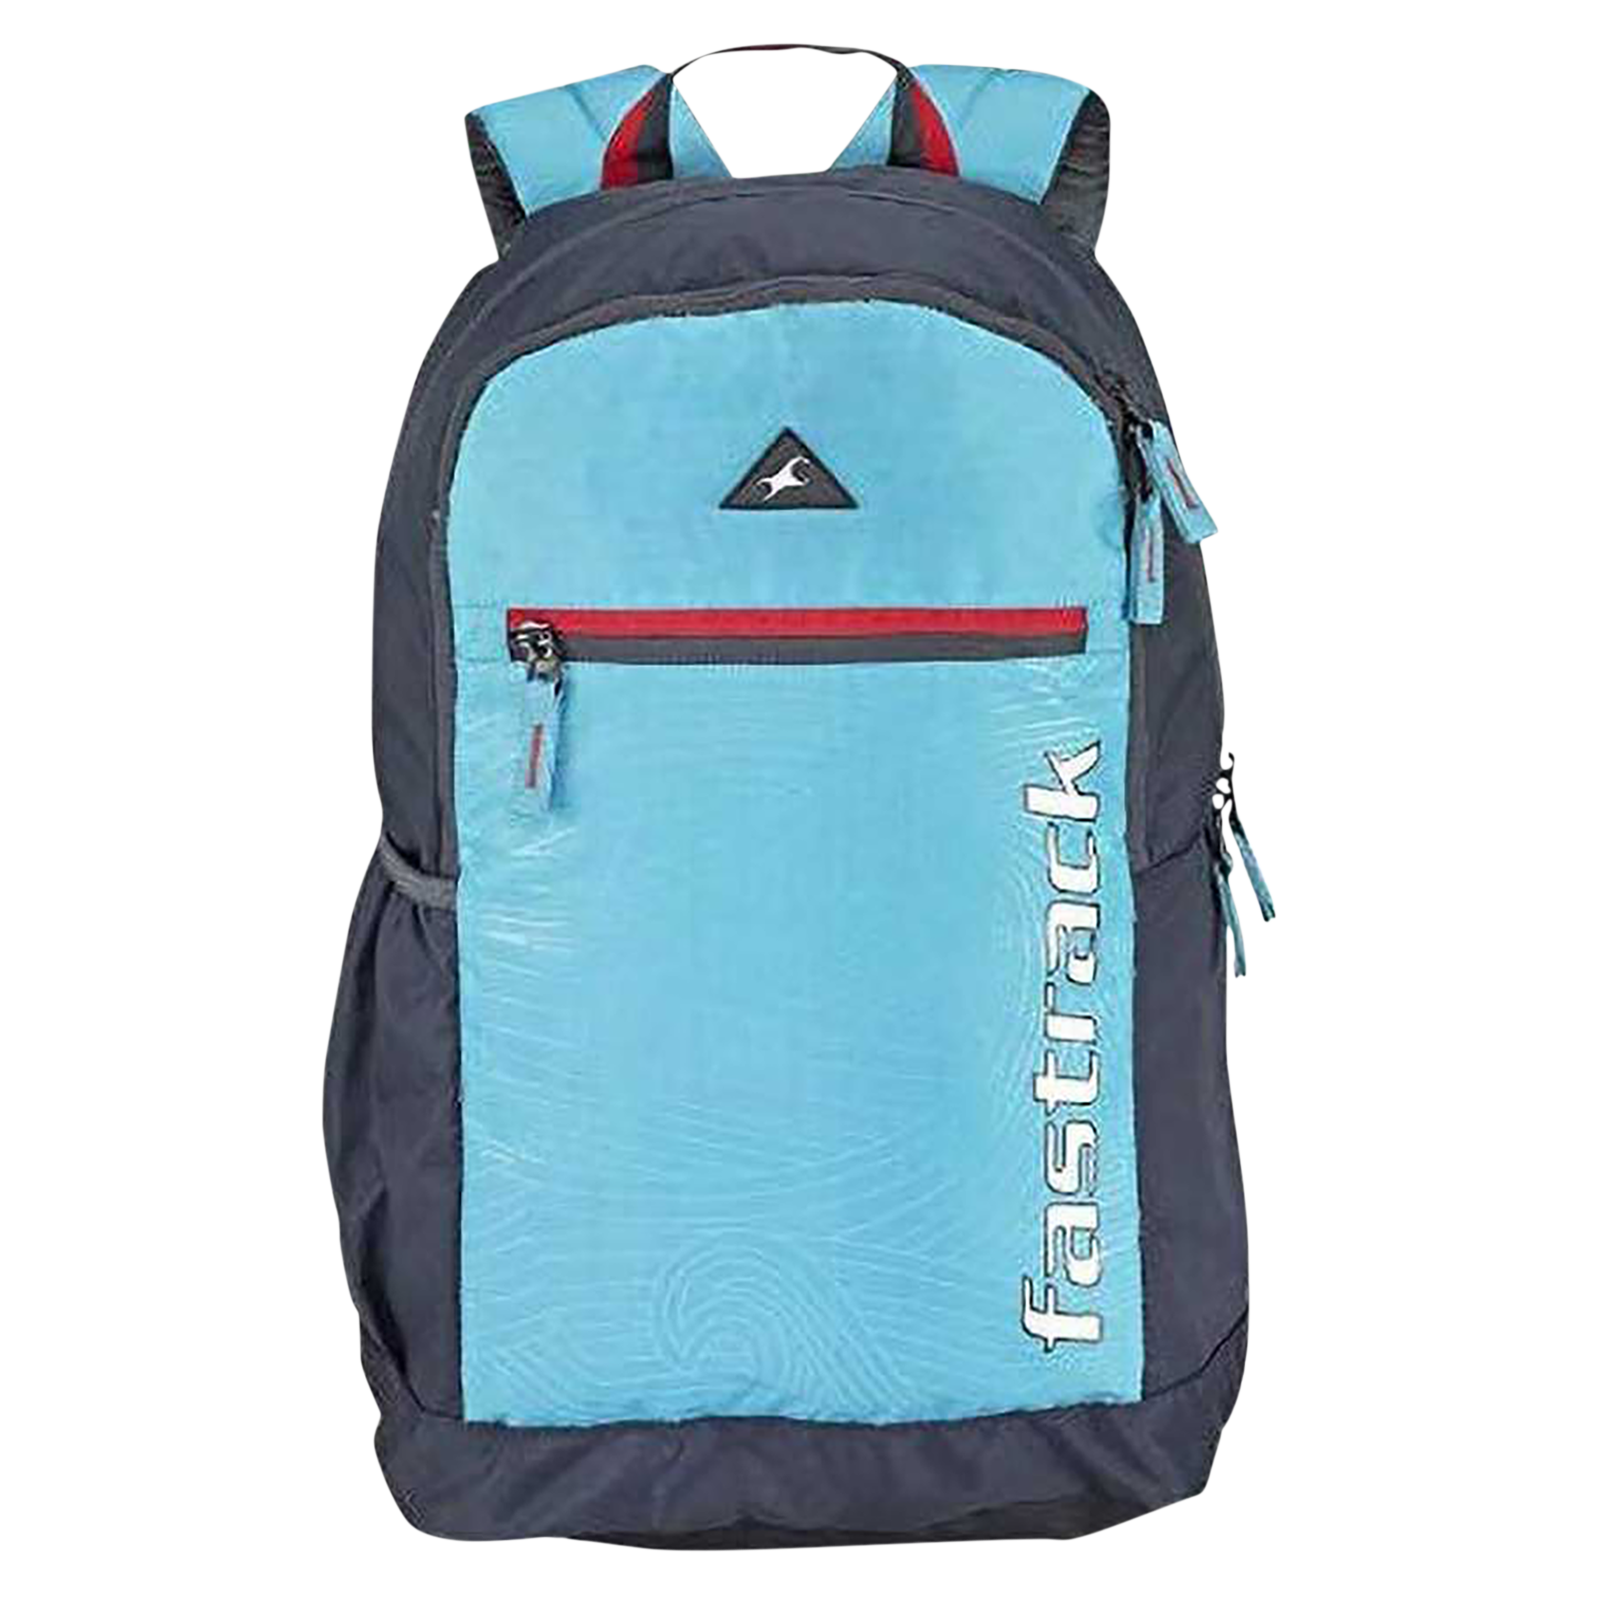 Buy Fastrack 2507 Ltrs Grey School Backpack AC027NGY01 at Amazonin